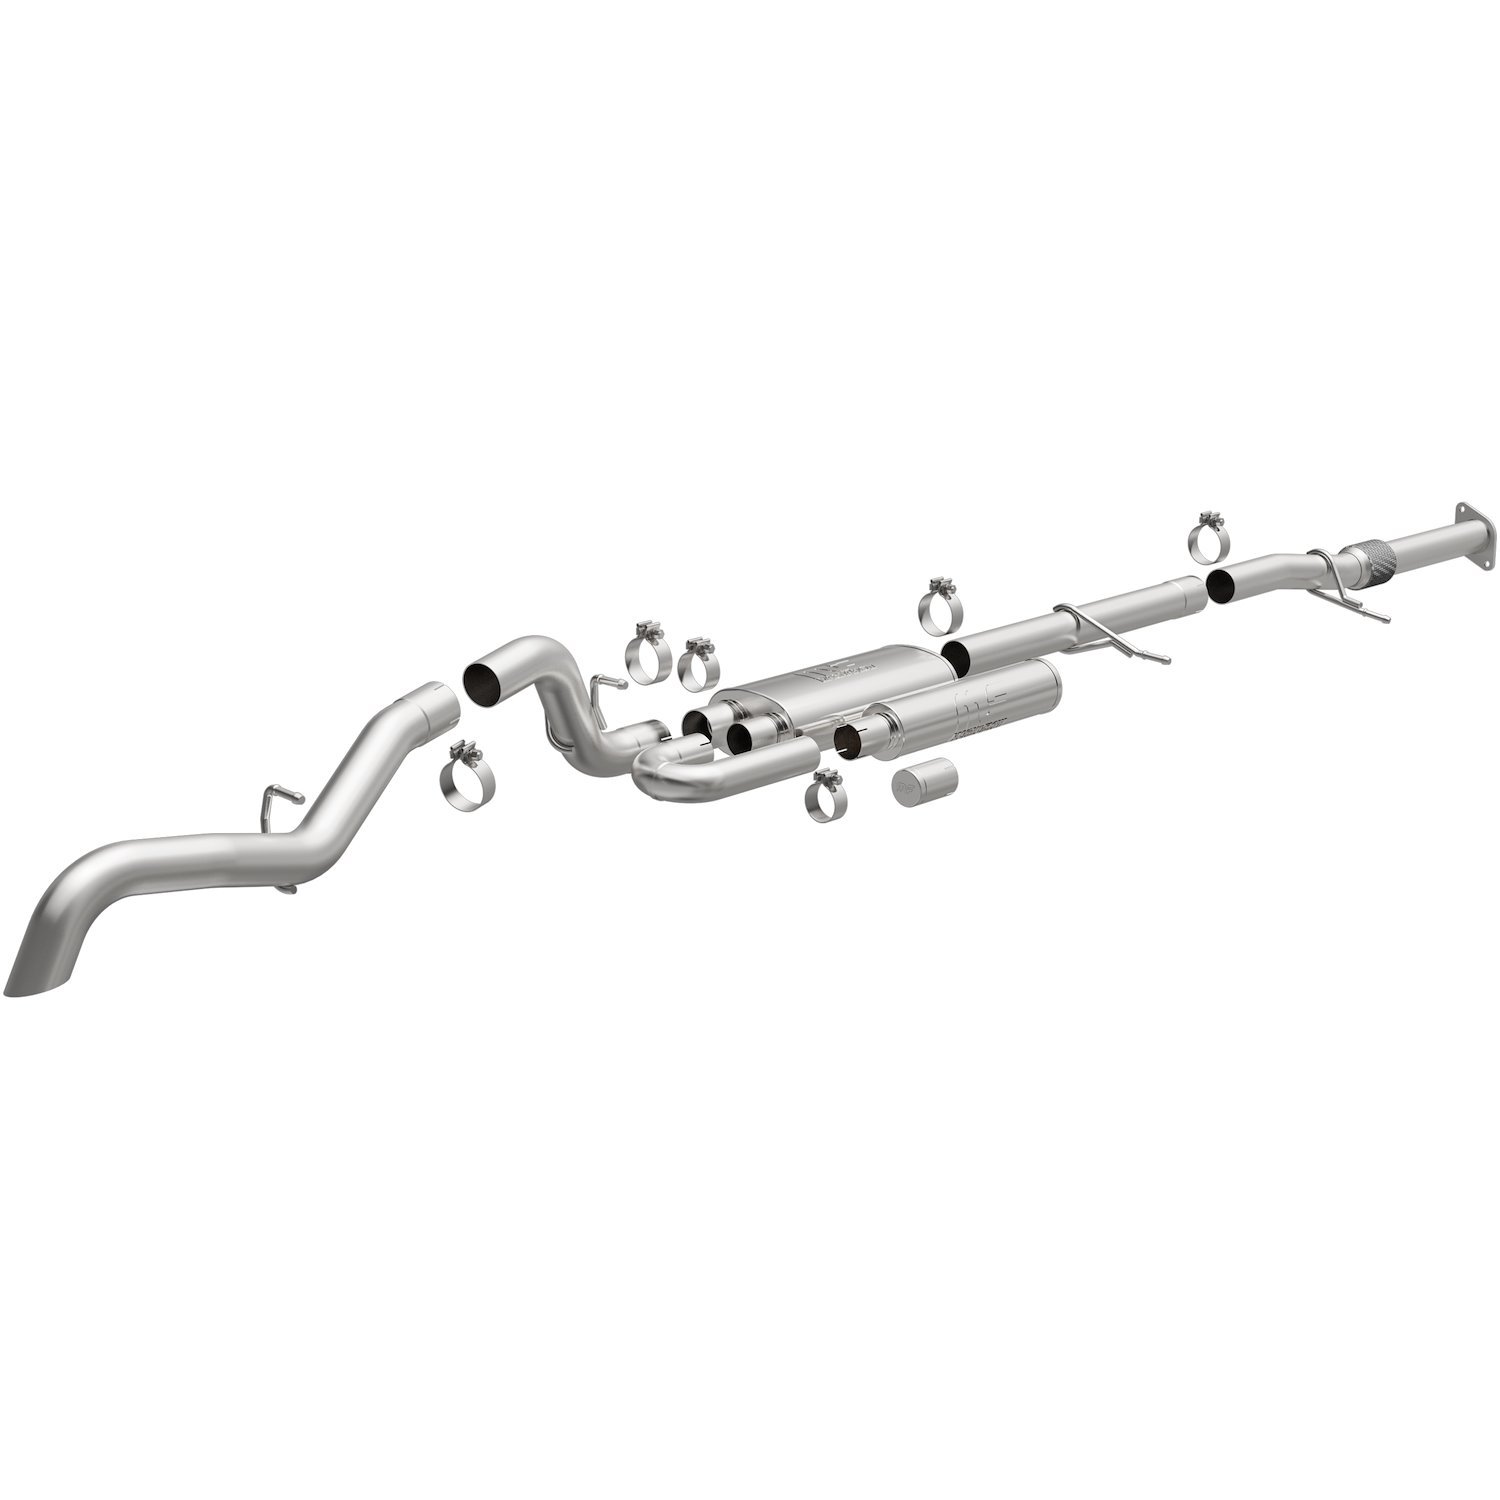 19648 Overland Series Cat-Back Exhaust System fits Select Chevy Colorado, GMC Canyon 2.7L L4